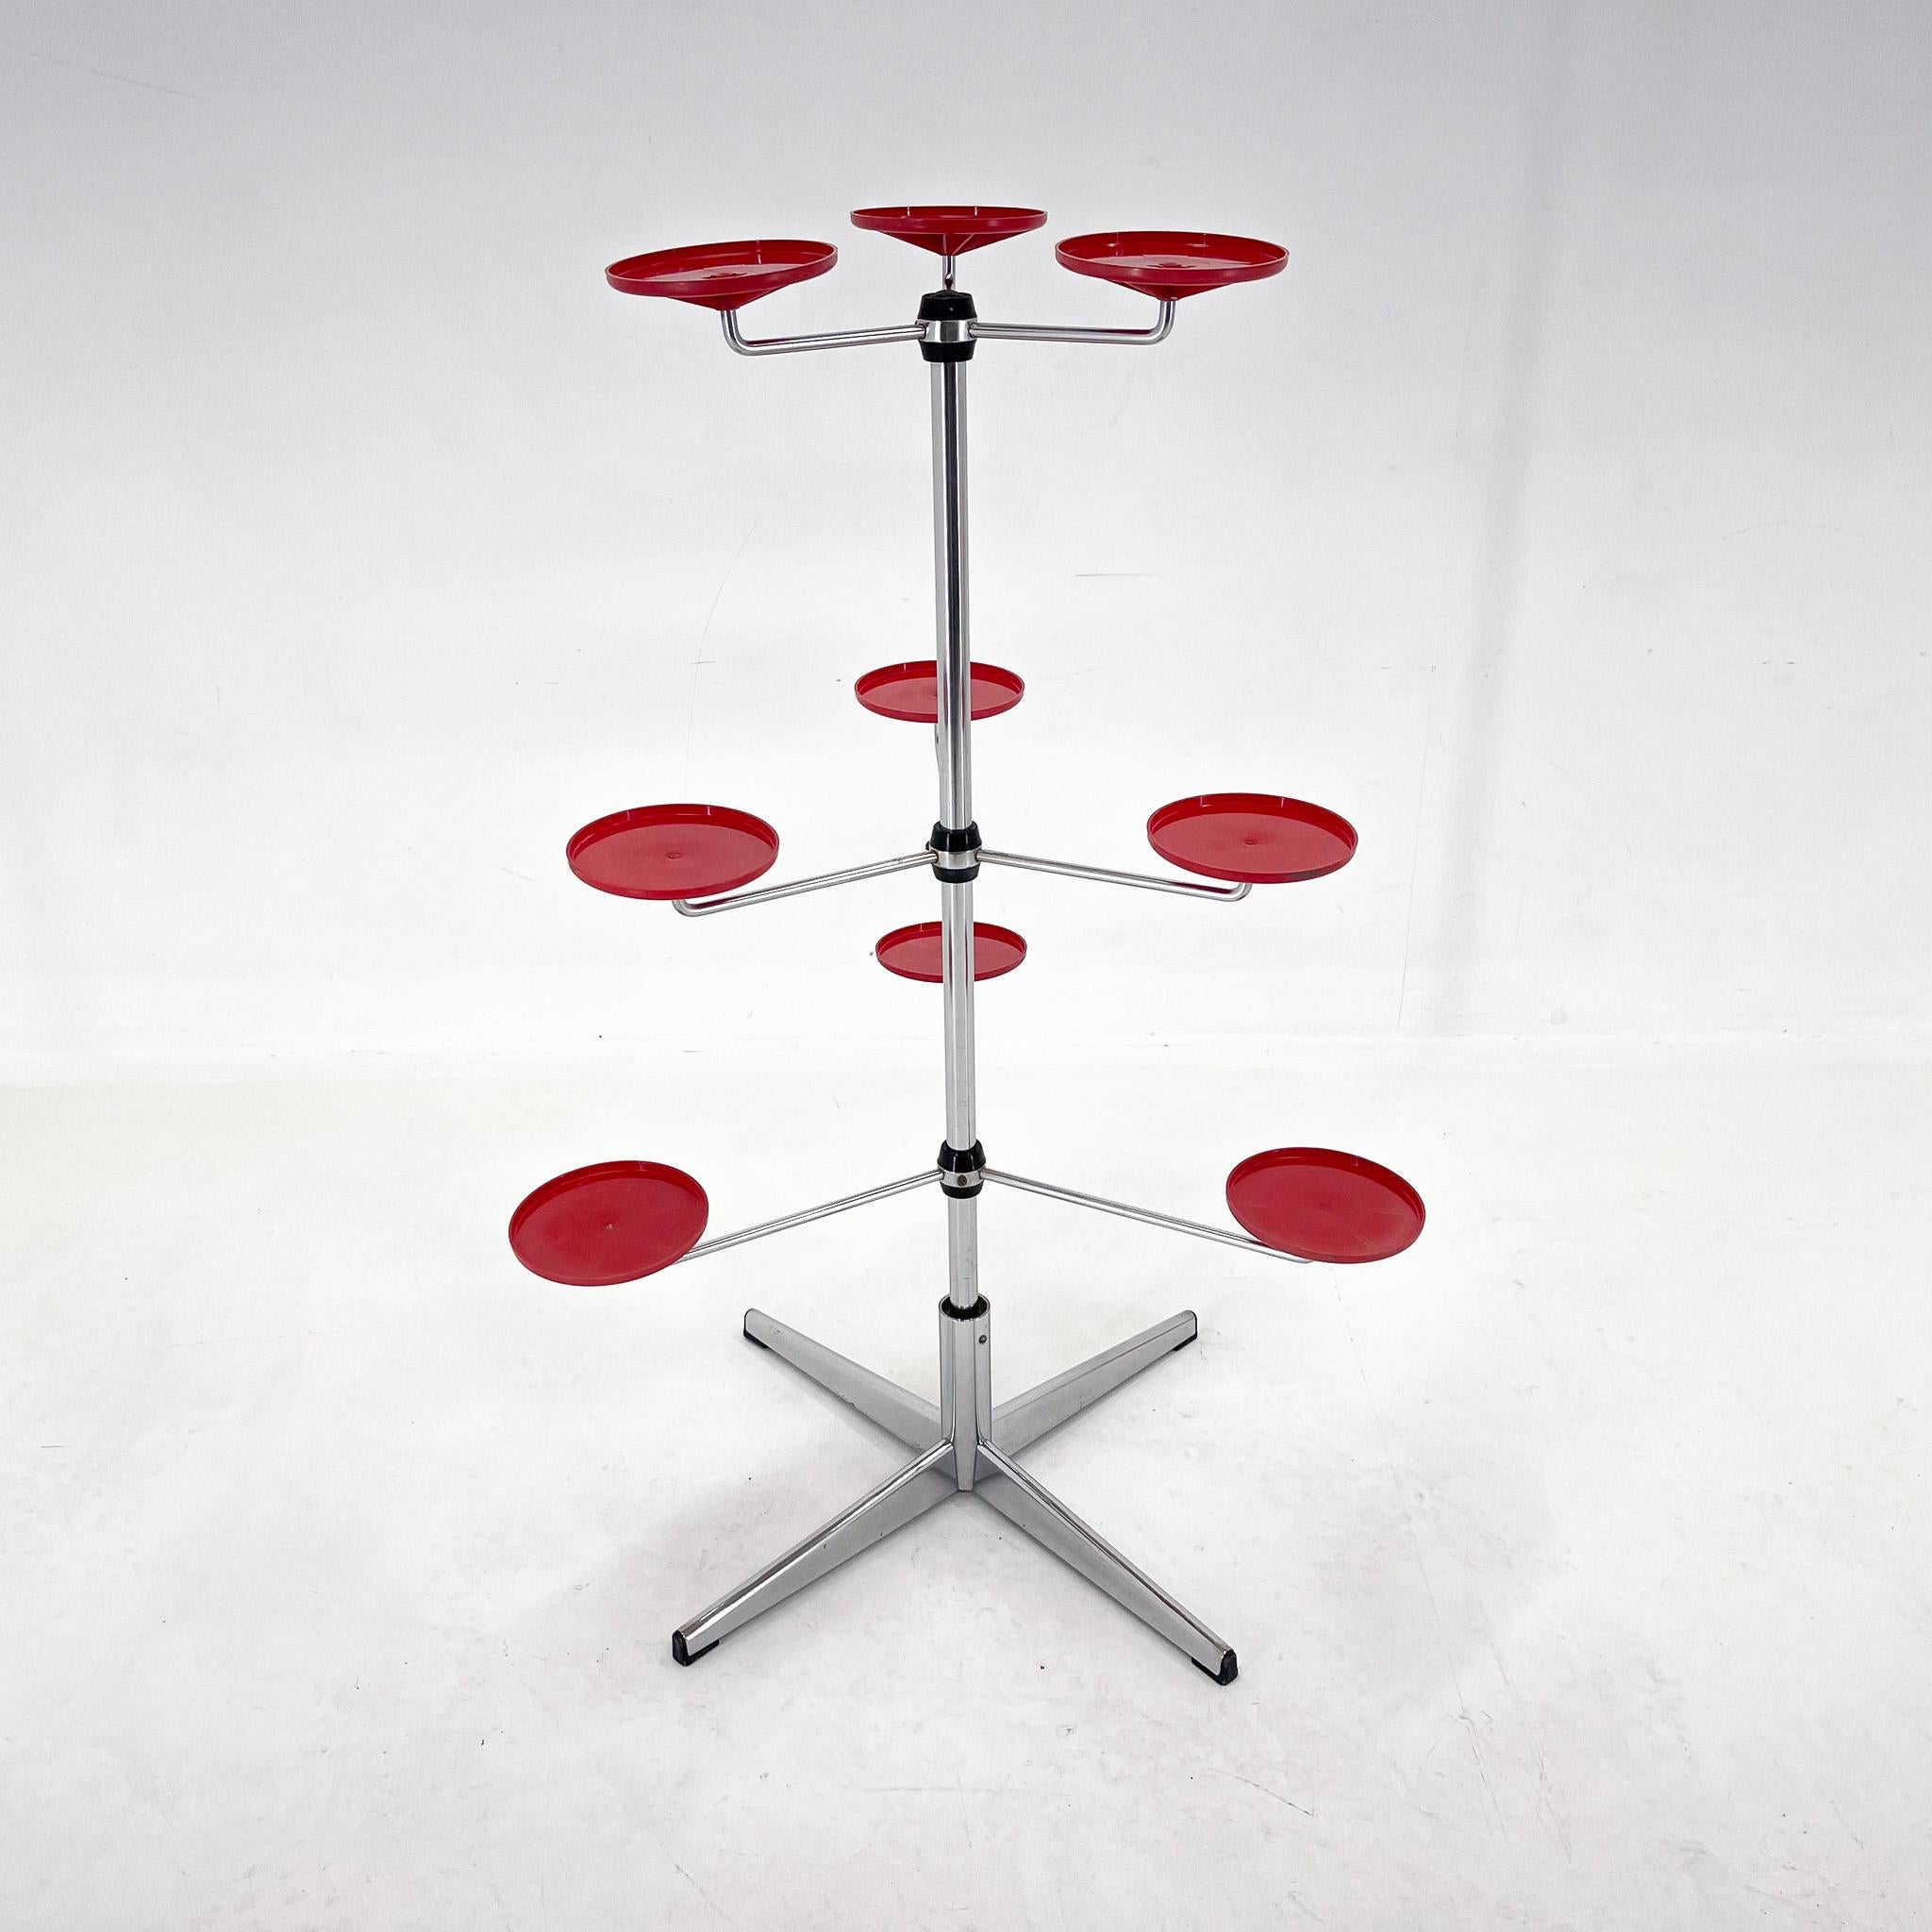 Unusual vintage plant stand made of chrome-plated metal. The stand has three tiers that can be rotated. Each tier has three red plastic trays for placing pots. The stand can of course be used to display any items or used as a stand-alone decoration.